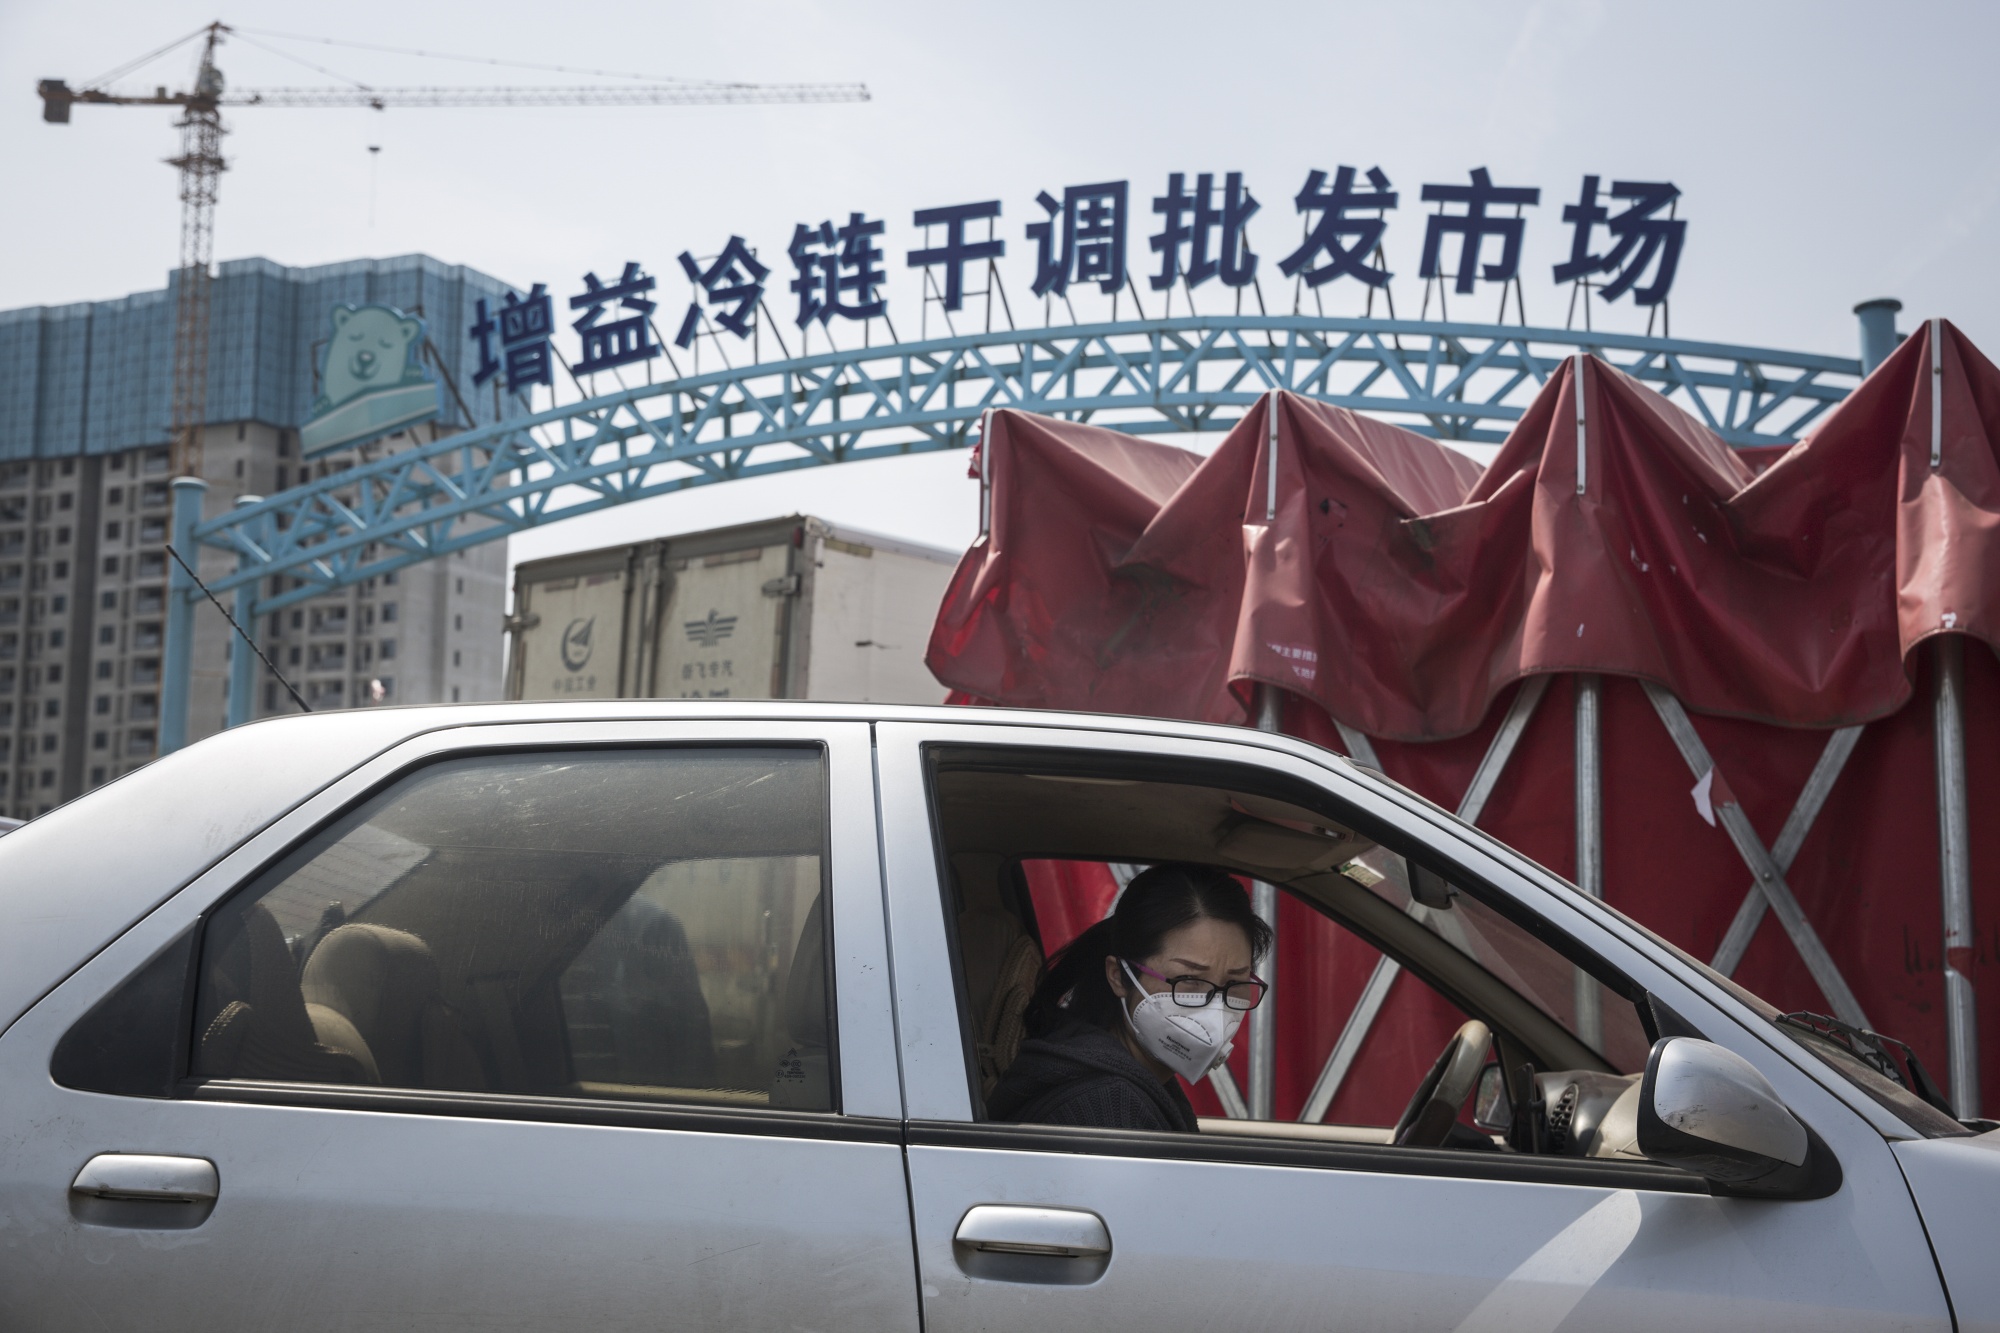 A woman wearing a protective mask sits in her car at the Baishazhou wet market in Wuhan, Hubei Province, China.